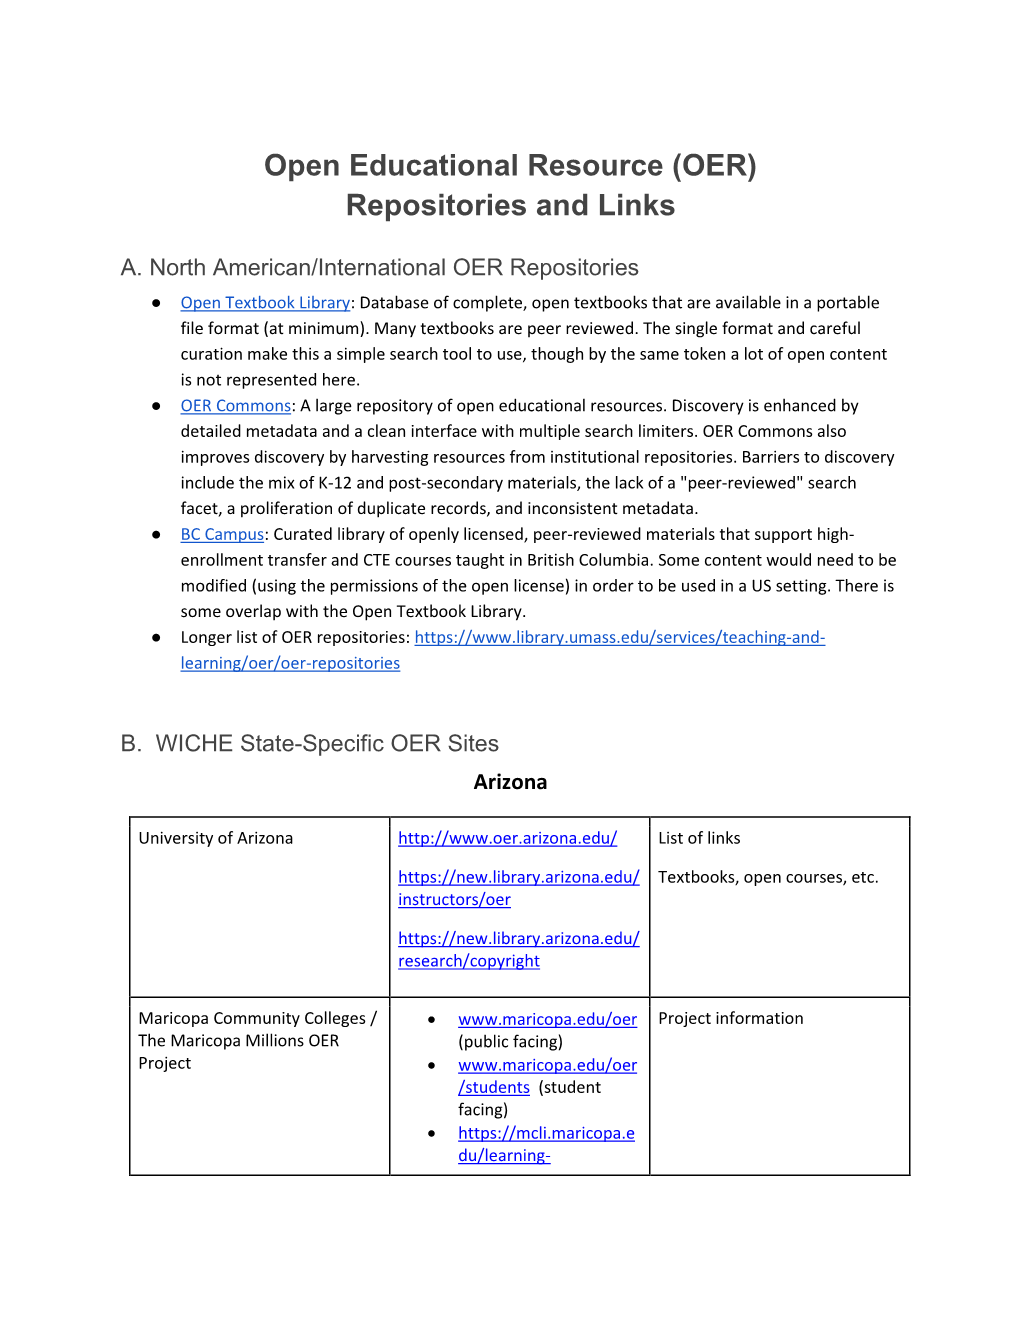 Open Educational Resource (OER) Repositories and Links